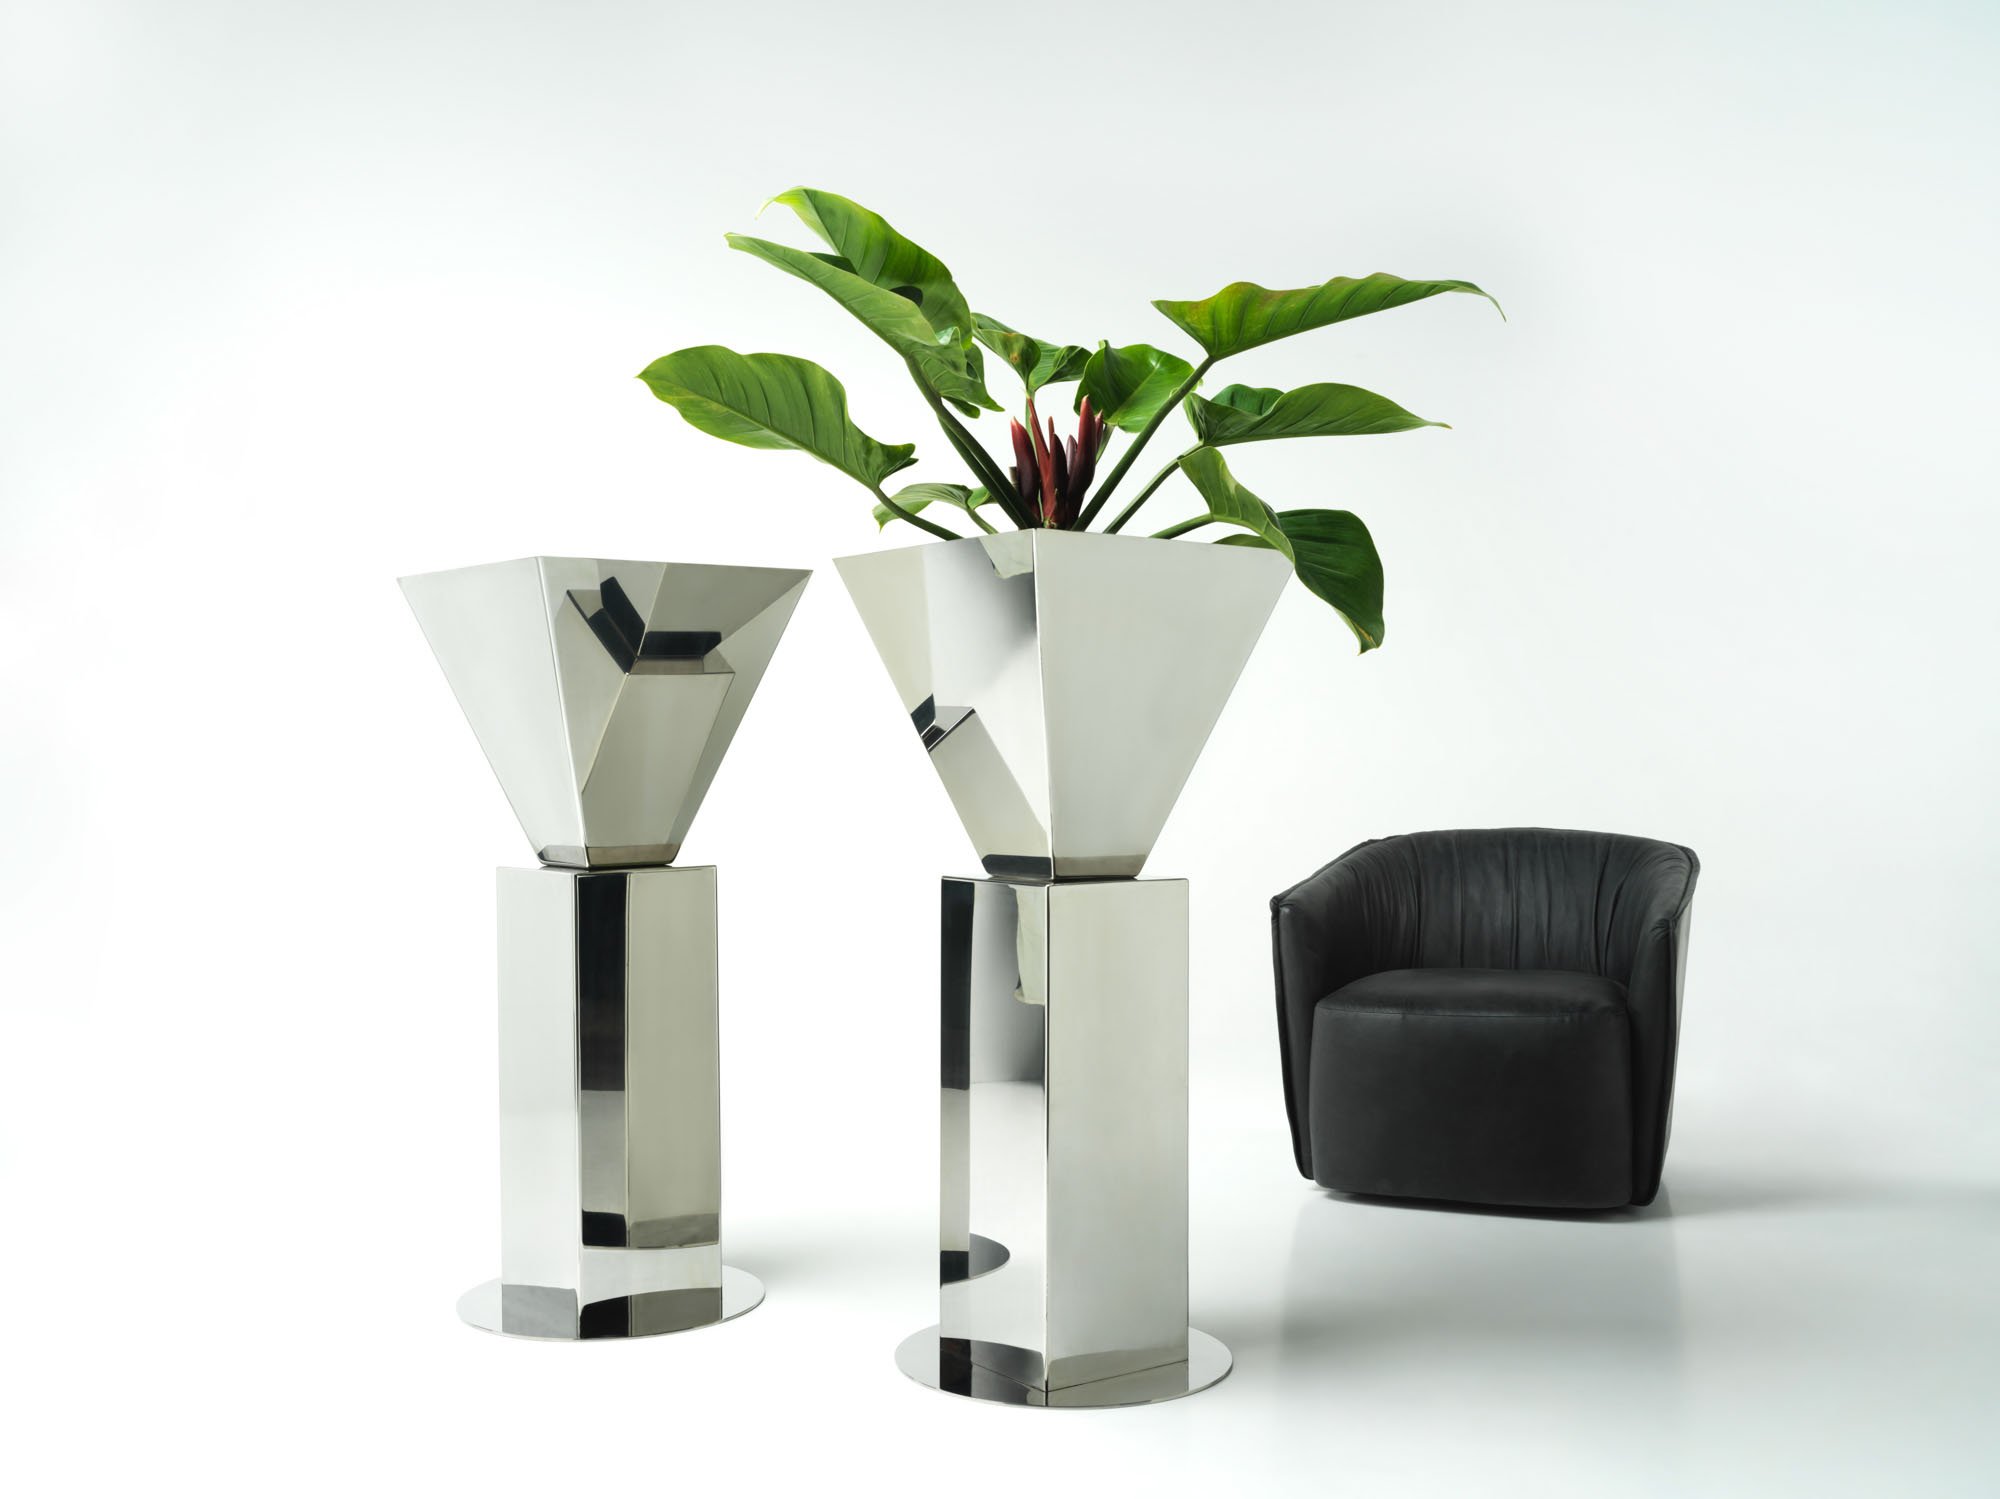 studio-ciao-b1-polished-stainless-steel-indoor-plant.jpg